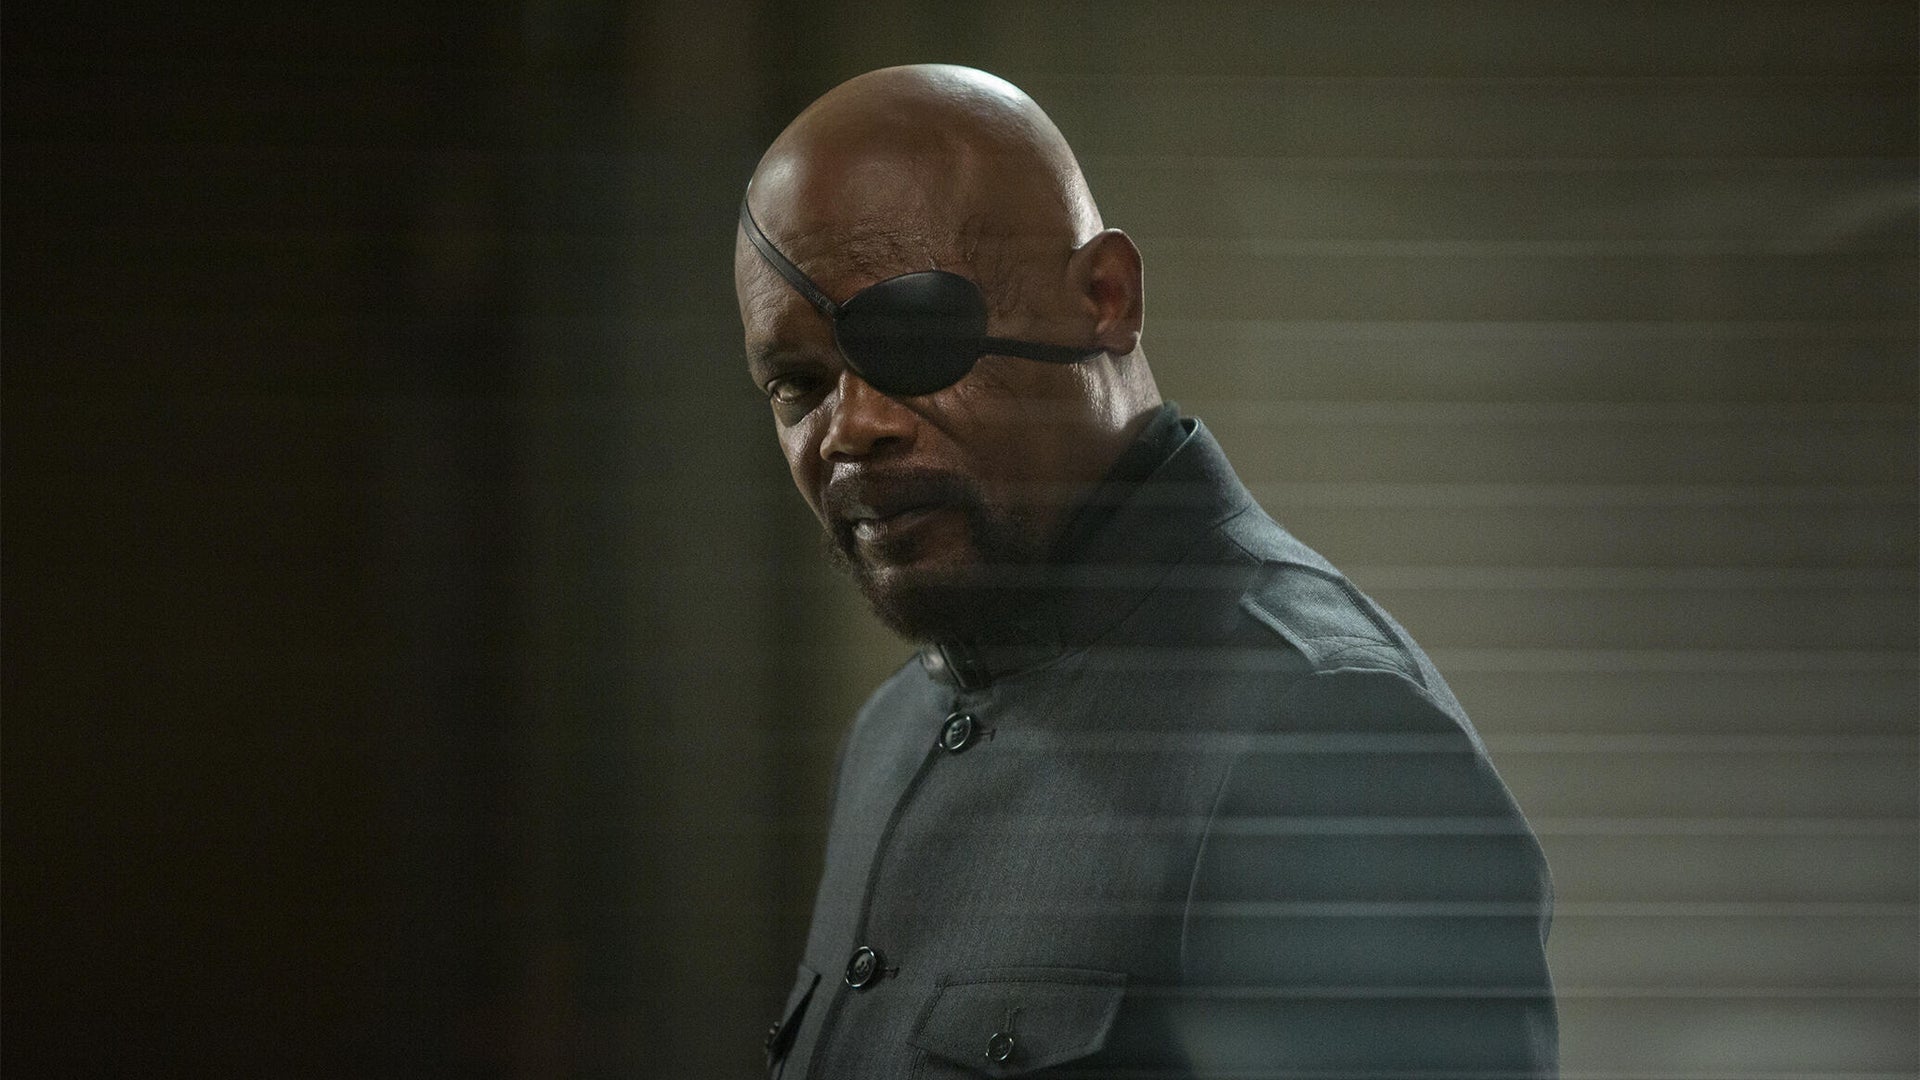 Samuel L. Jackson Will Reportedly Reprise His Role as Marvel's Nick Fury in New Disney+ Series